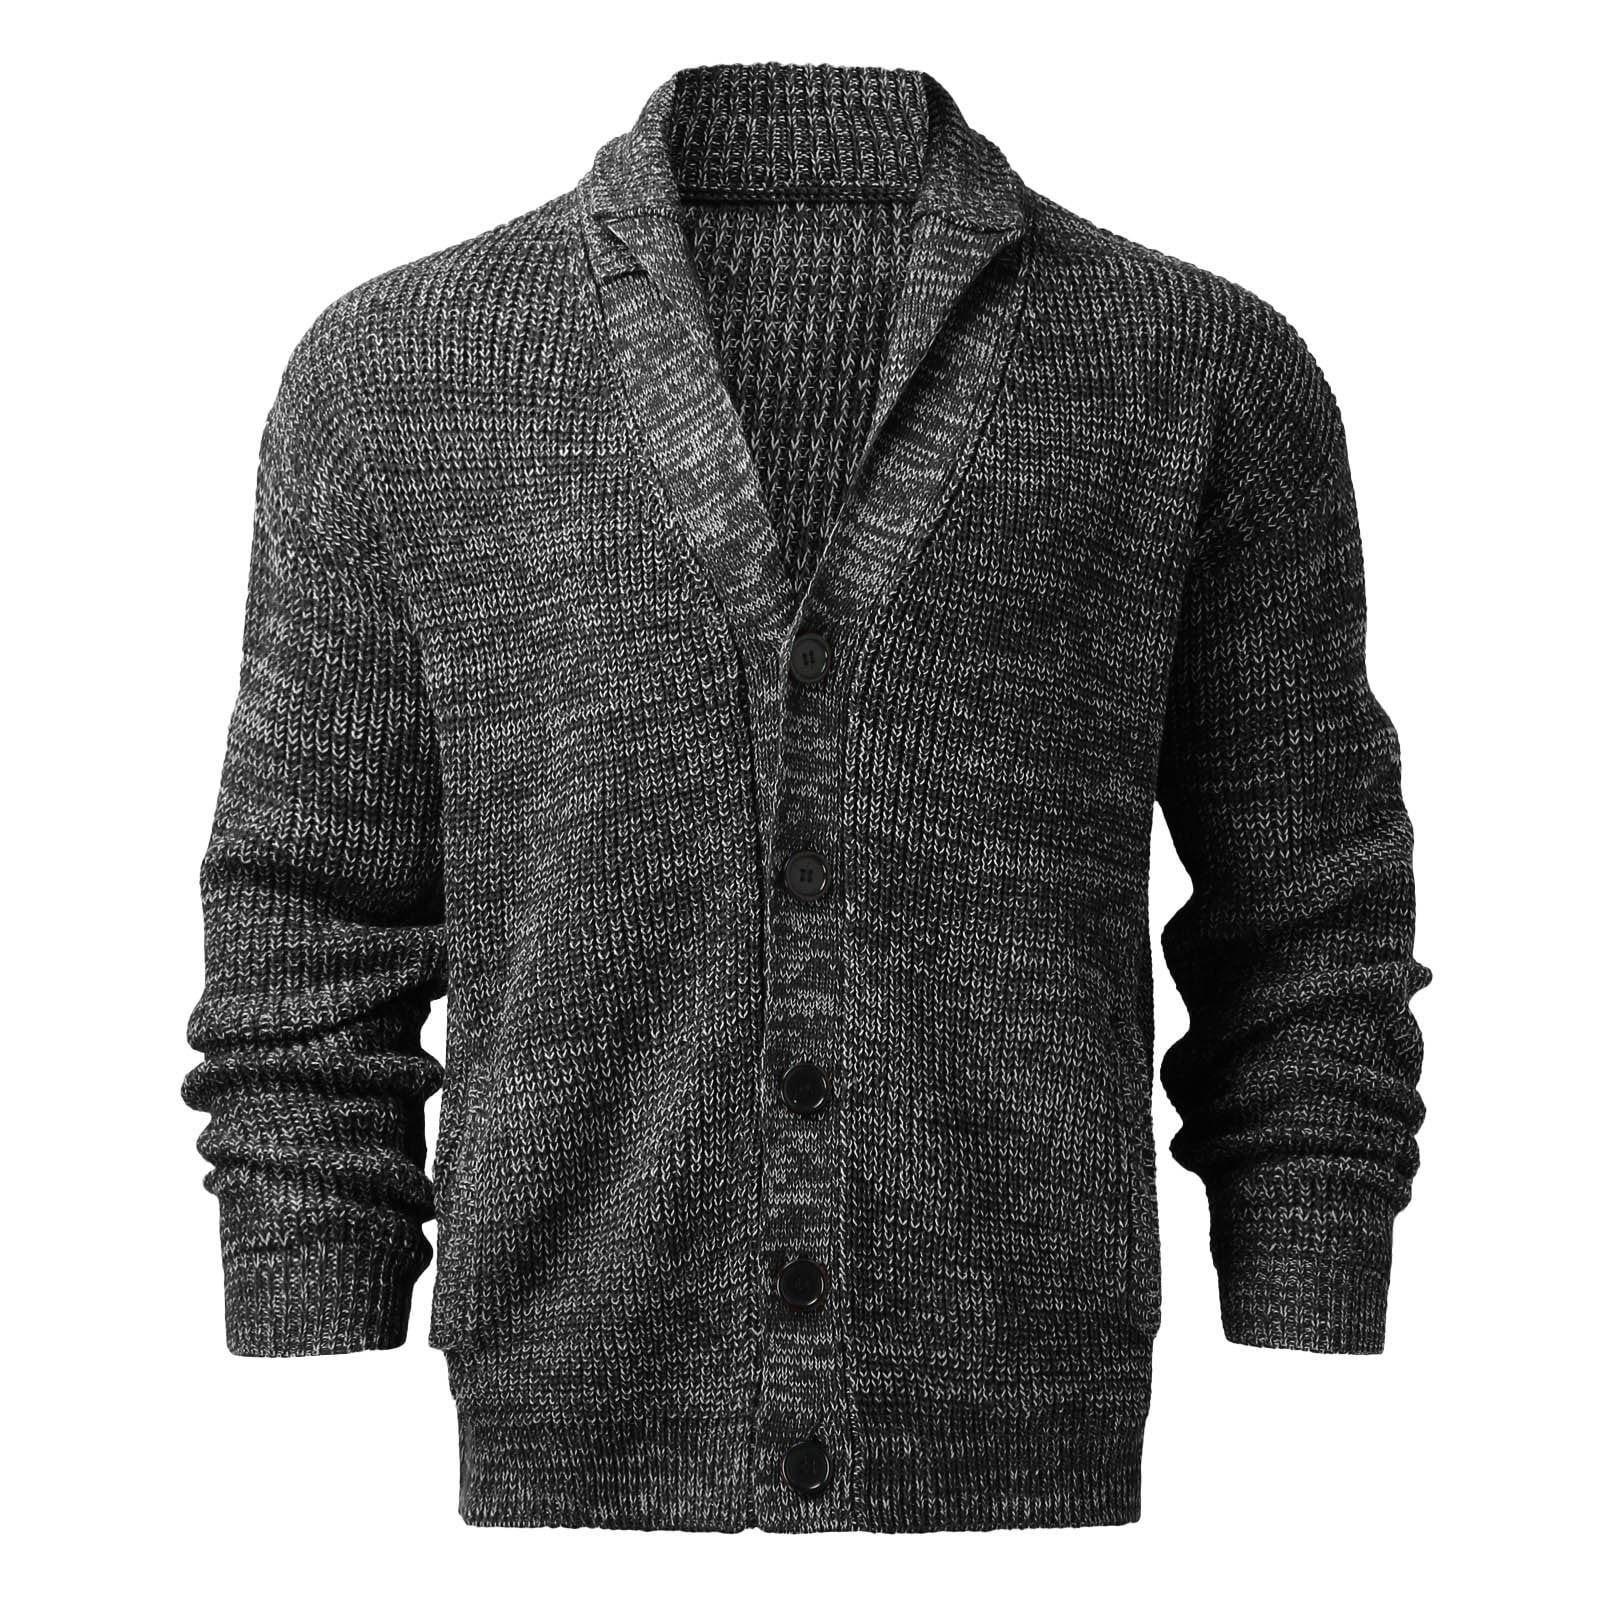 Karlywindow Mens Cable Knit Cardigan Sweater Shawl Collar Loose Fit Long Sleeve Casual Cardigans